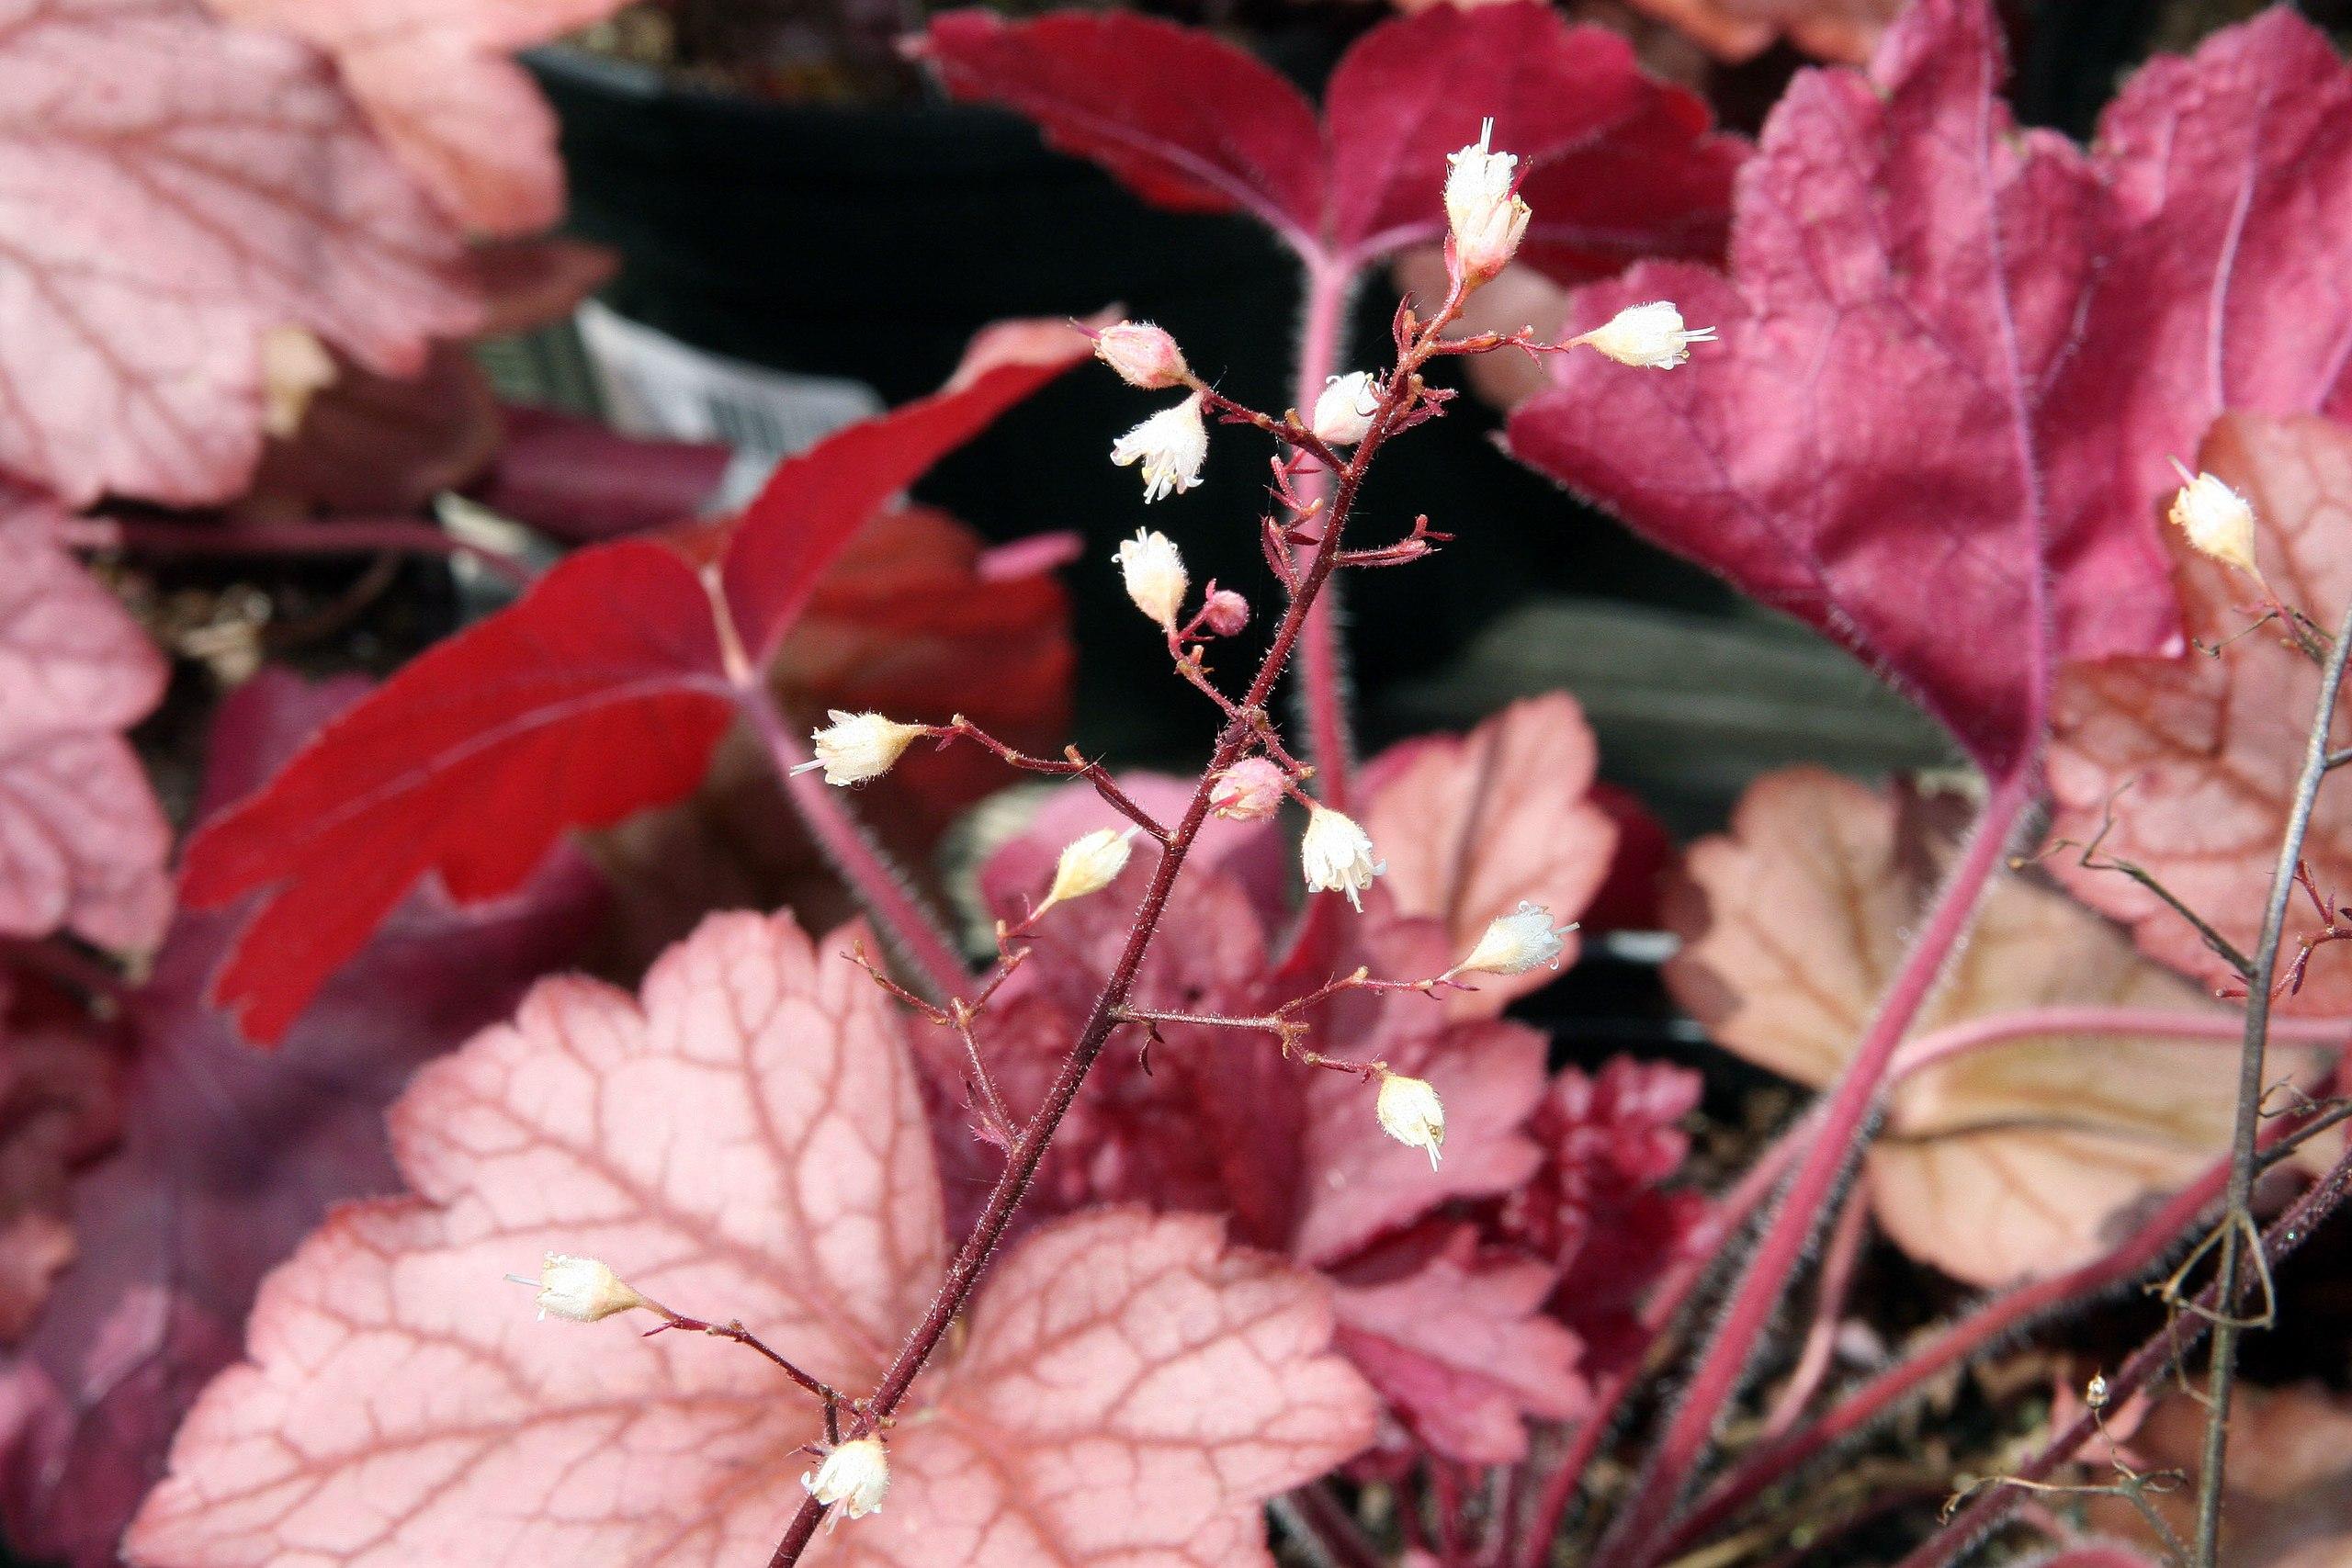 White flowers with white stigma, white style white stamen, white hair, pink bud and red stem with red leaves.